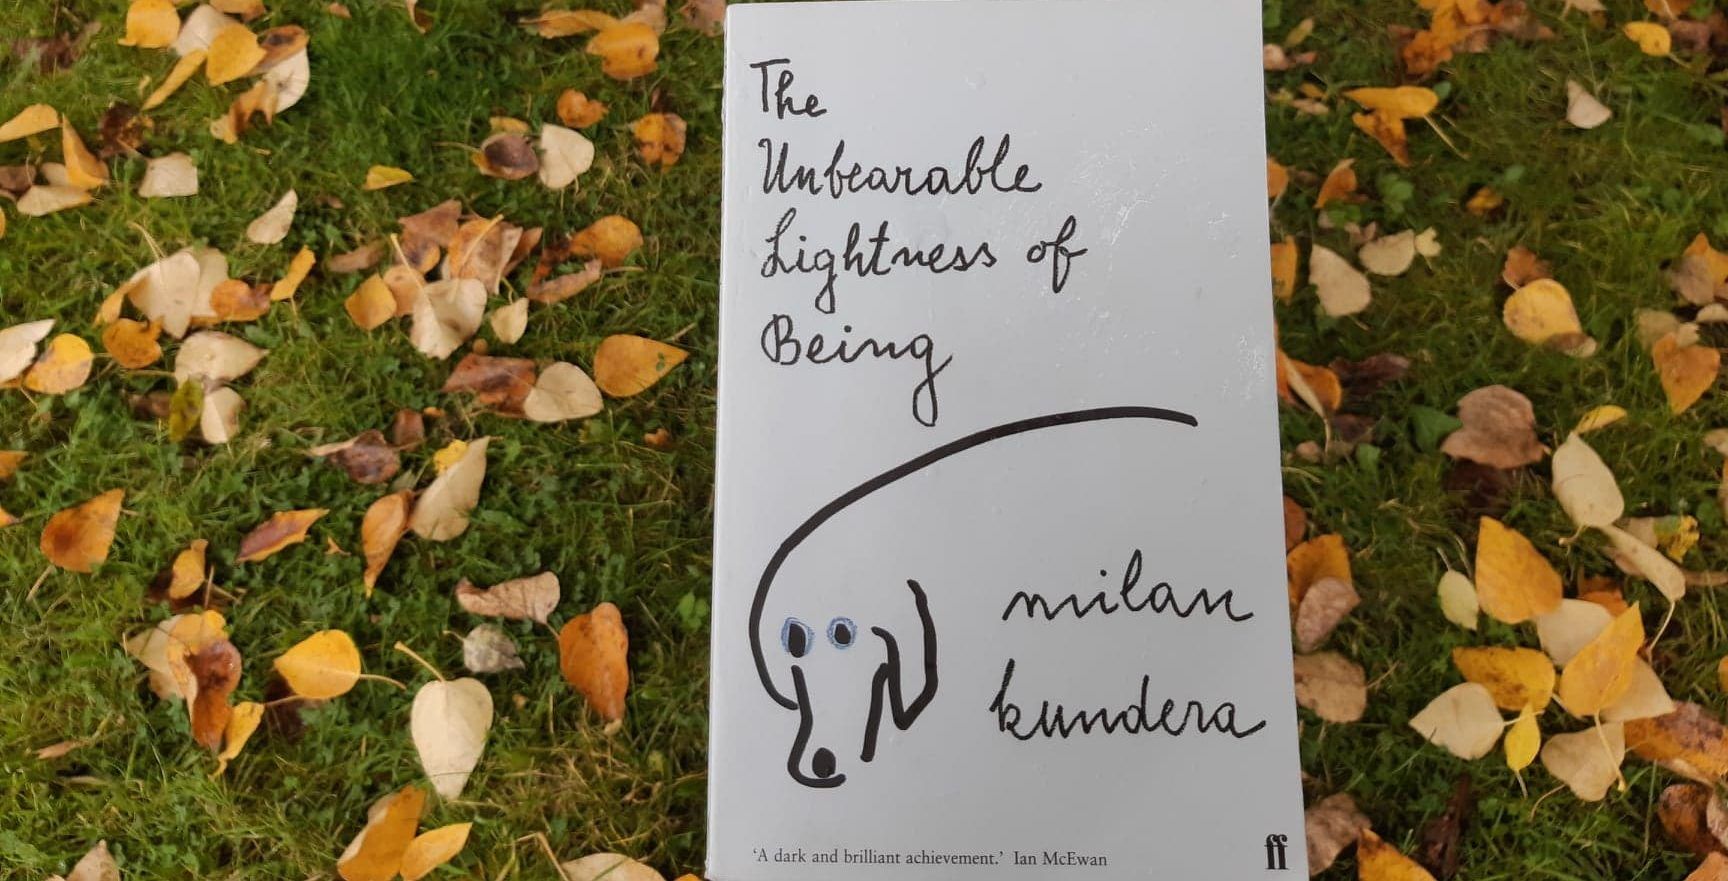 Photo of The Unbearable Lightness of Being by Milan Kundera against the backdrop of leaves